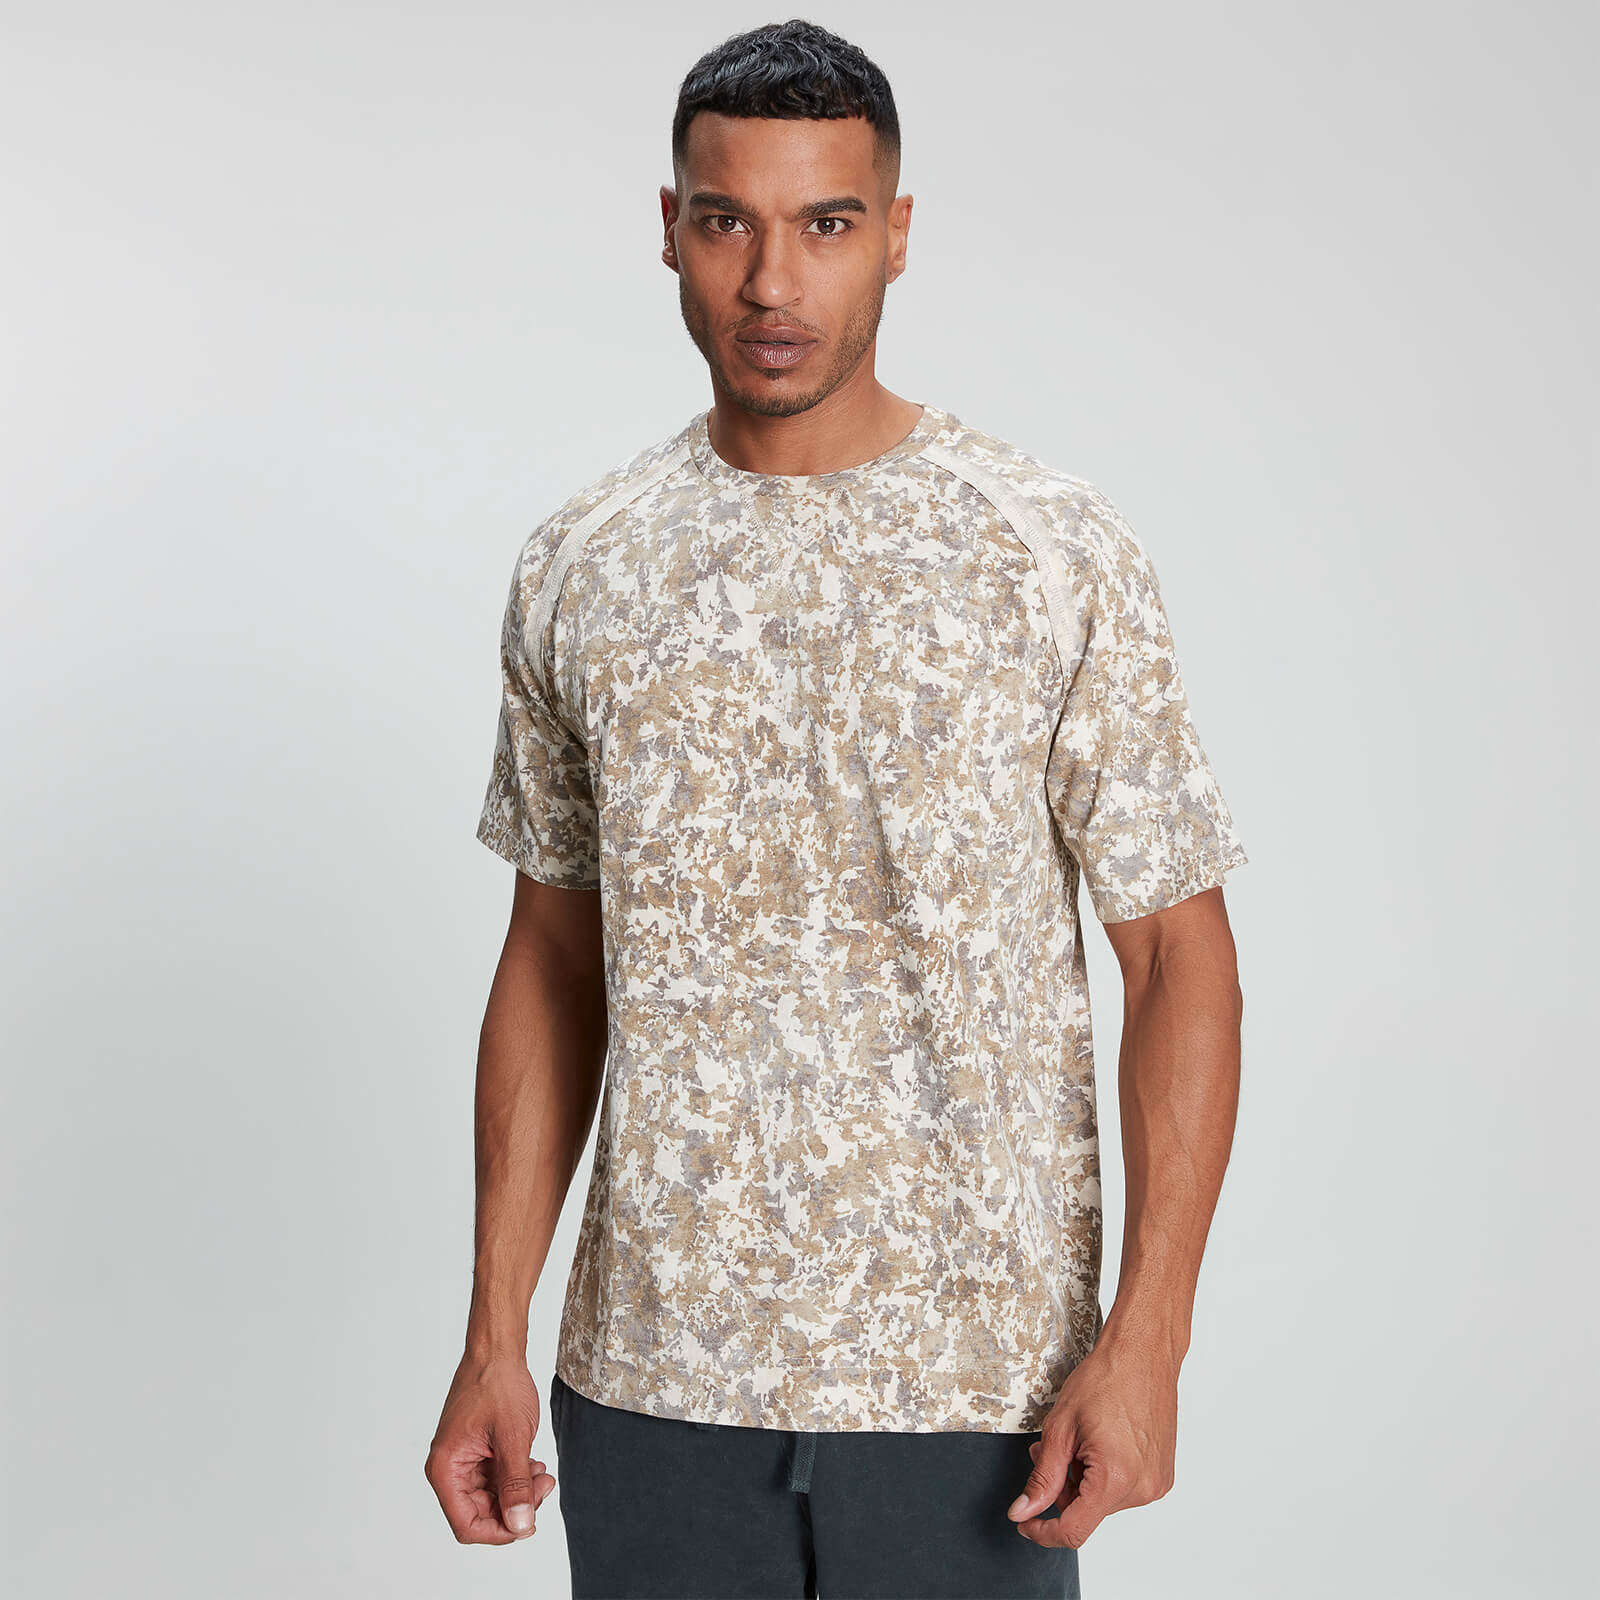 T-shirt MP Training pour hommes – Camouflage